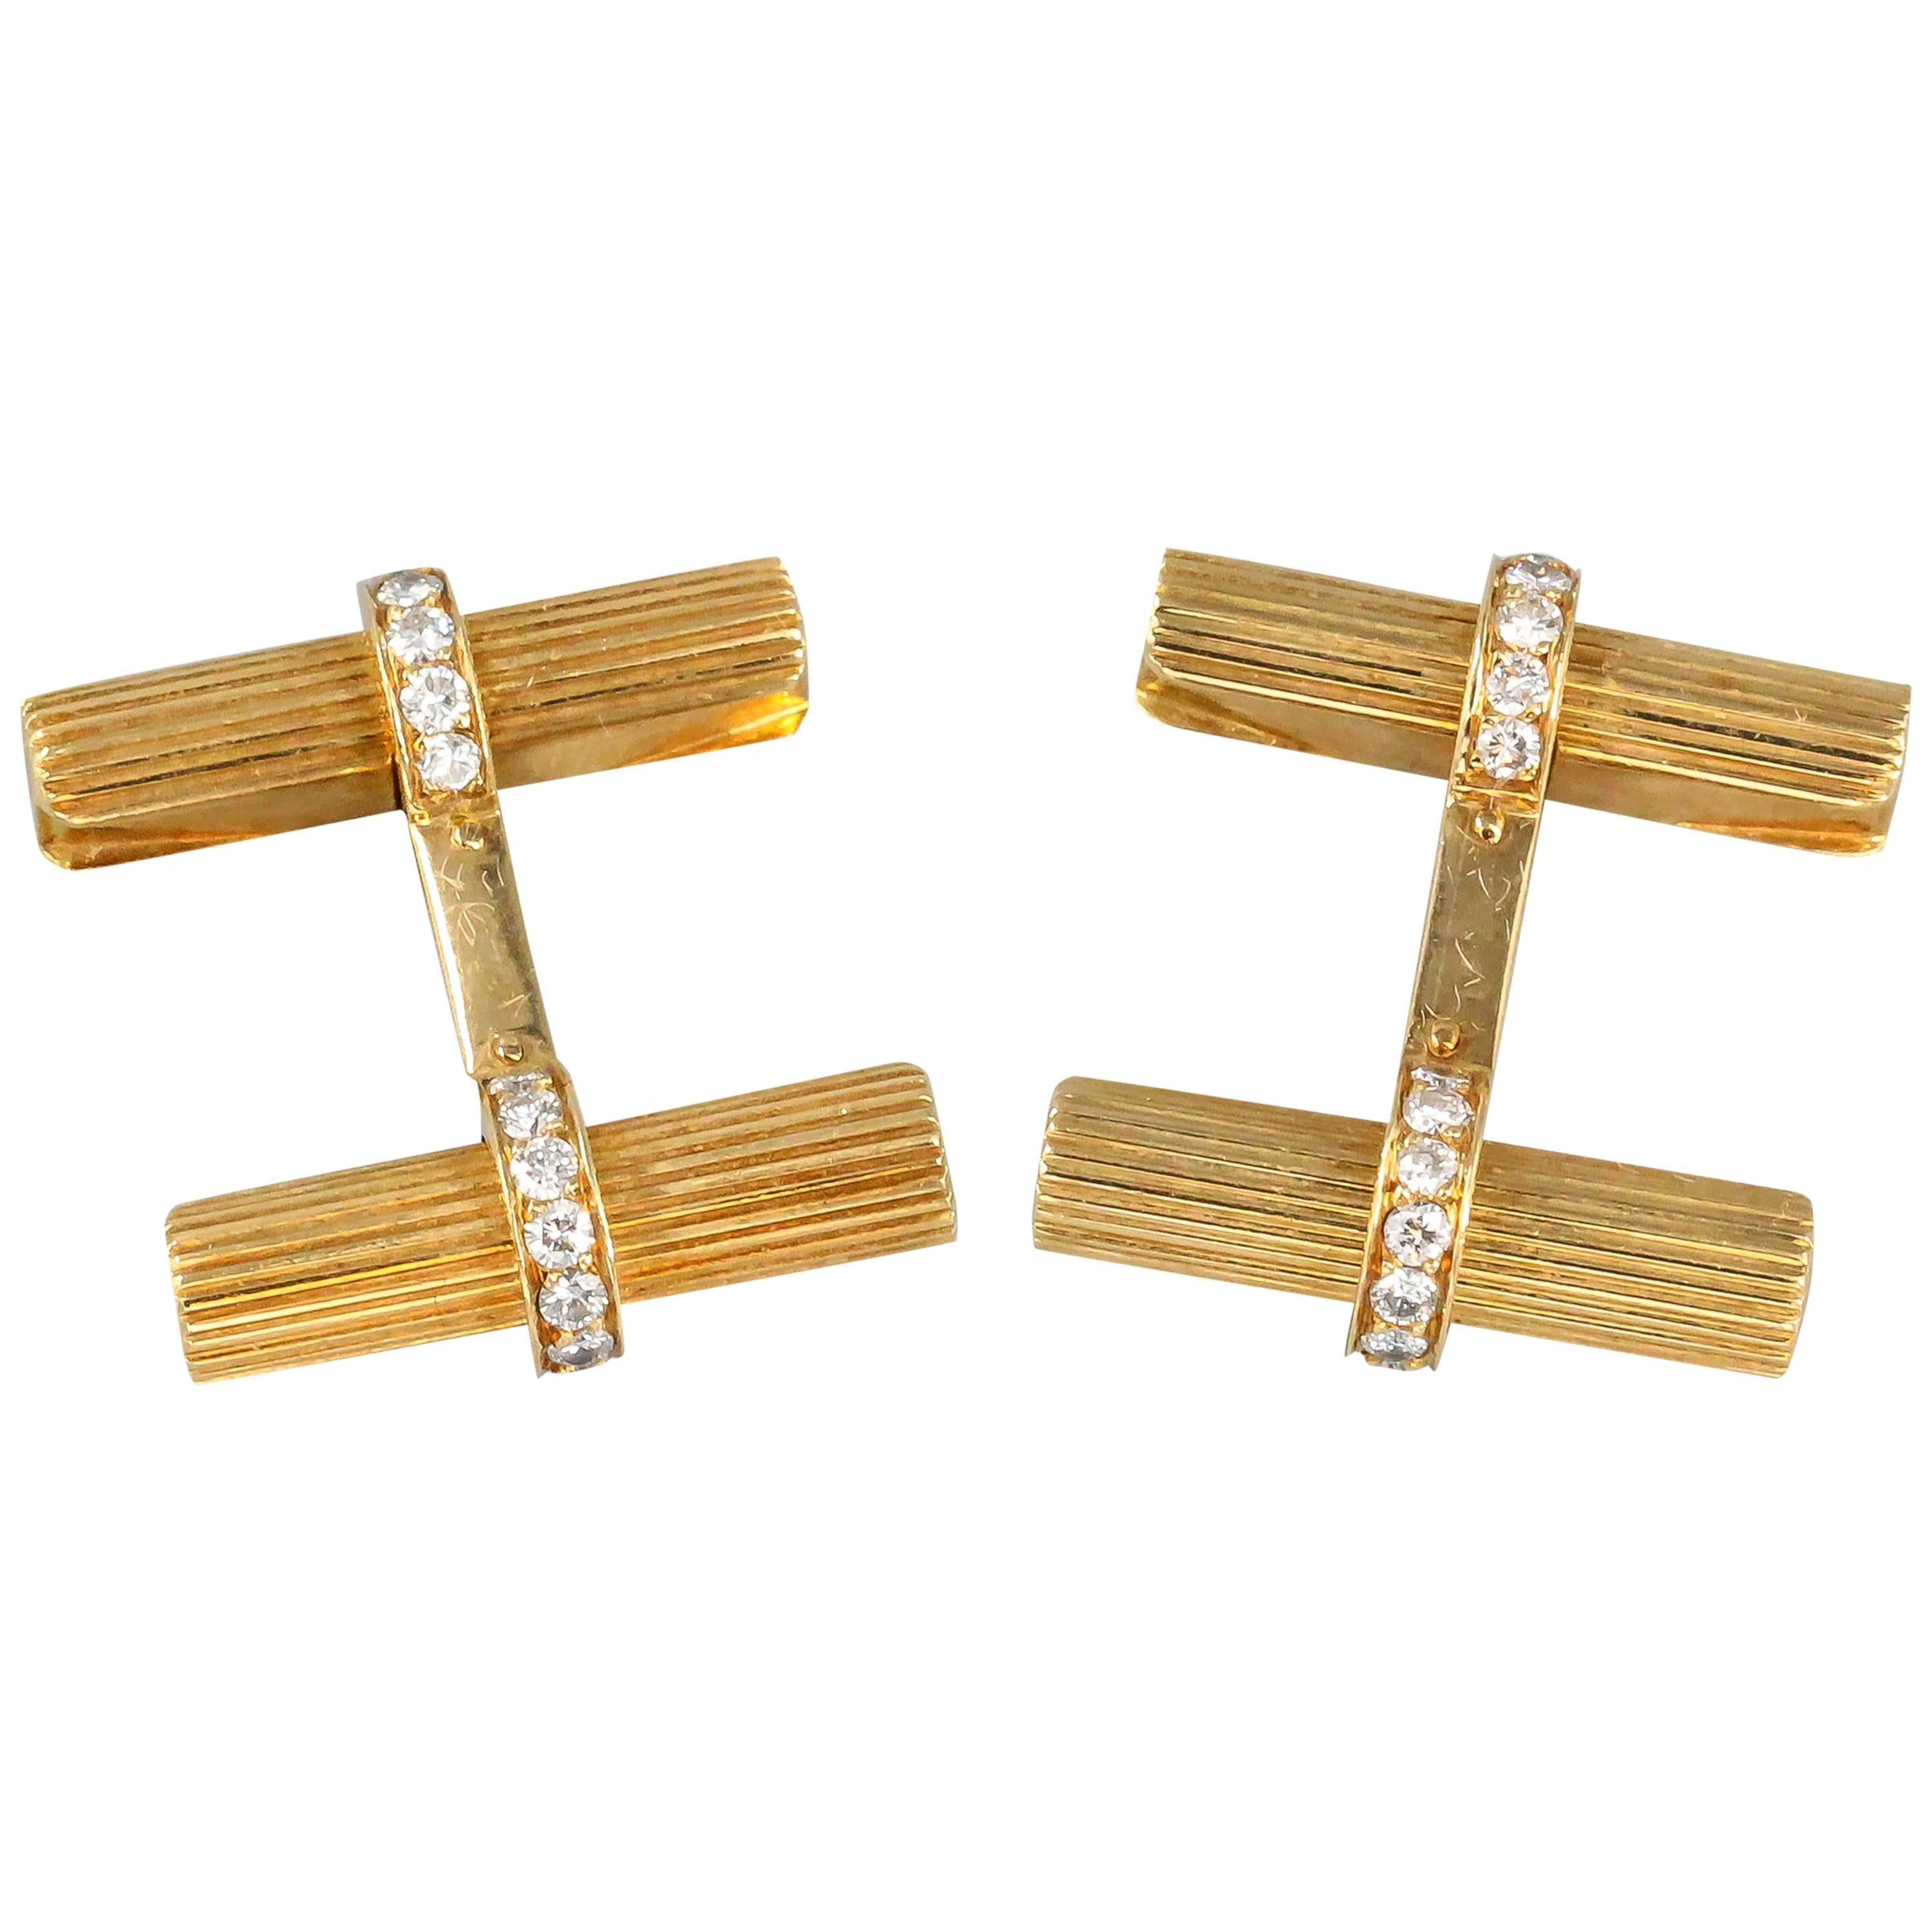 Handsome diamond, 18K yellow gold bar cufflinks and 3 studs set by Van Cleef & Arpels, circa 1970s. They feature high grade round brilliant cut diamonds and the bars can be removed to fit other bars of different materials if available. Expertly